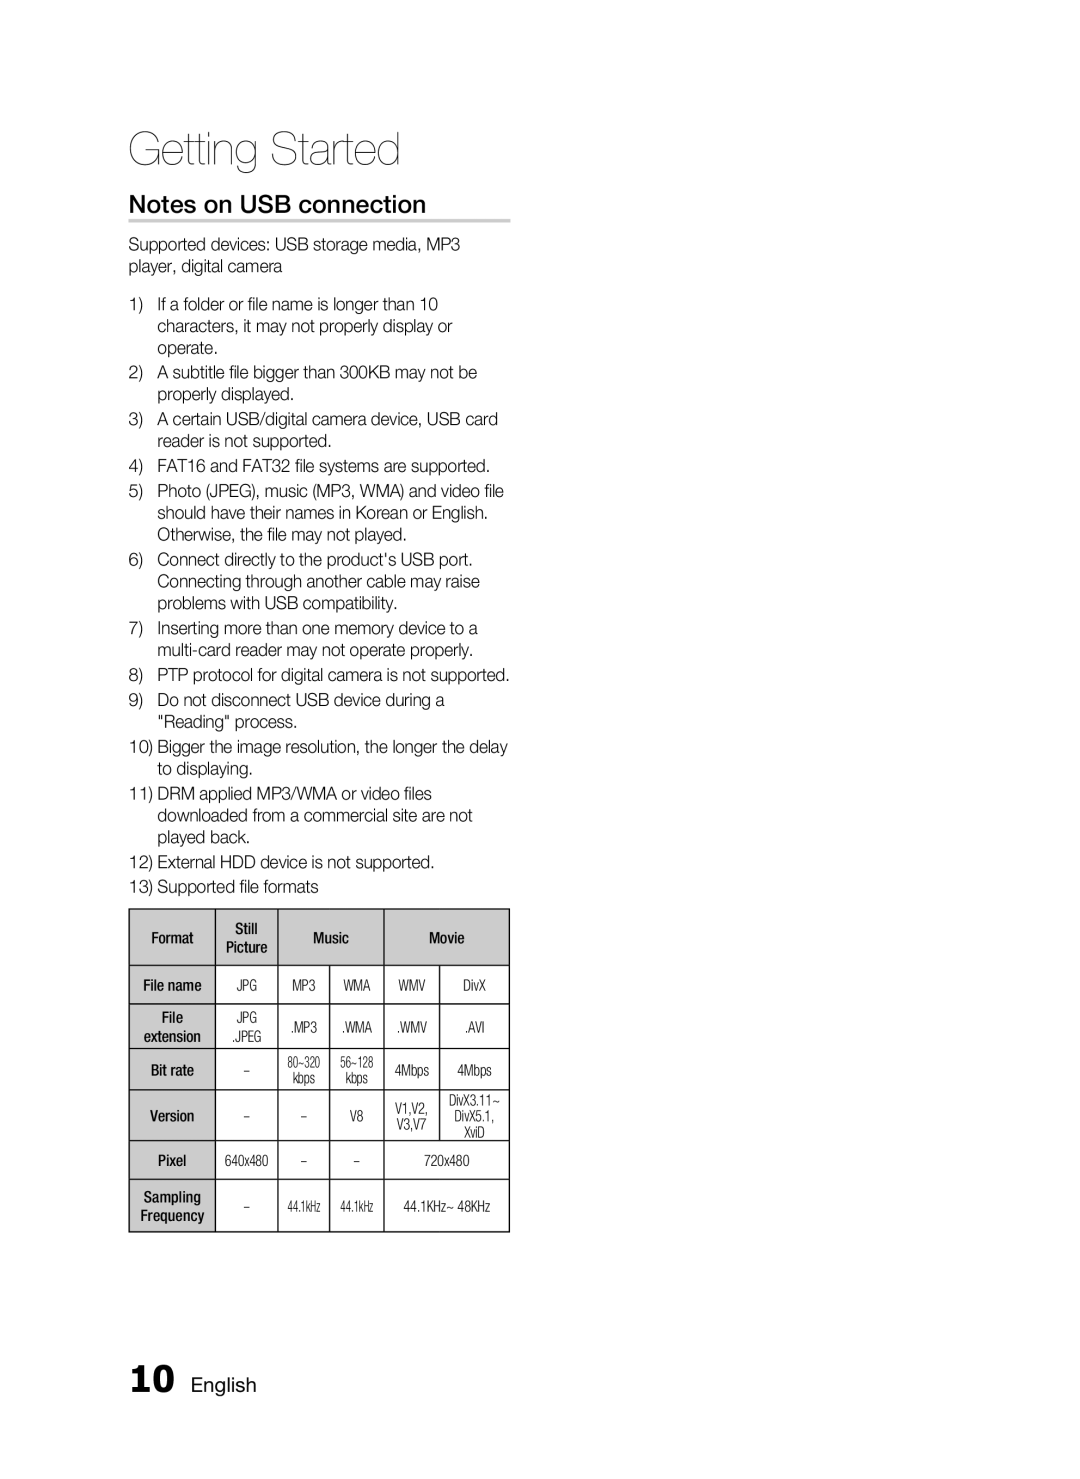 Samsung HT-D555, HT-D553, HT-D550 user manual Notes on USB connection, English, Getting Started 